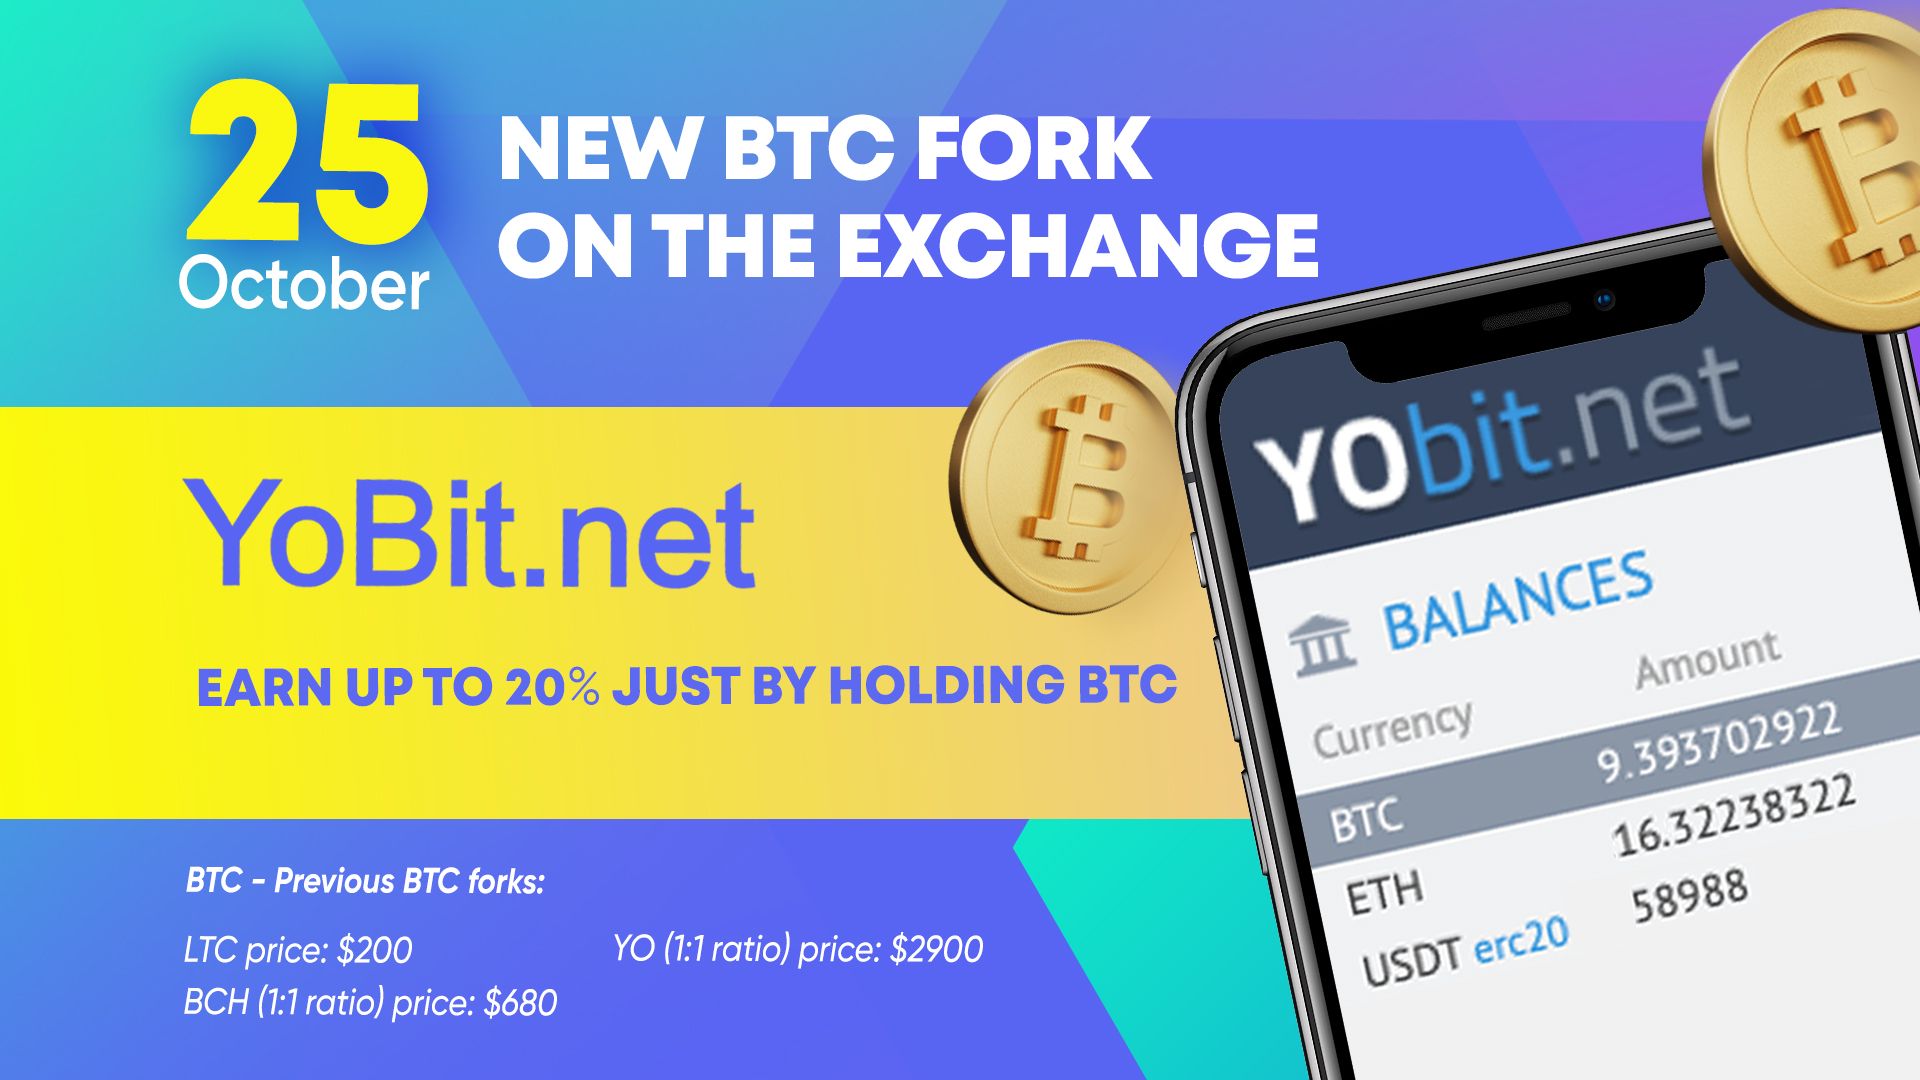 New Bitcoin Fork on YoBit.net Launches on October 25